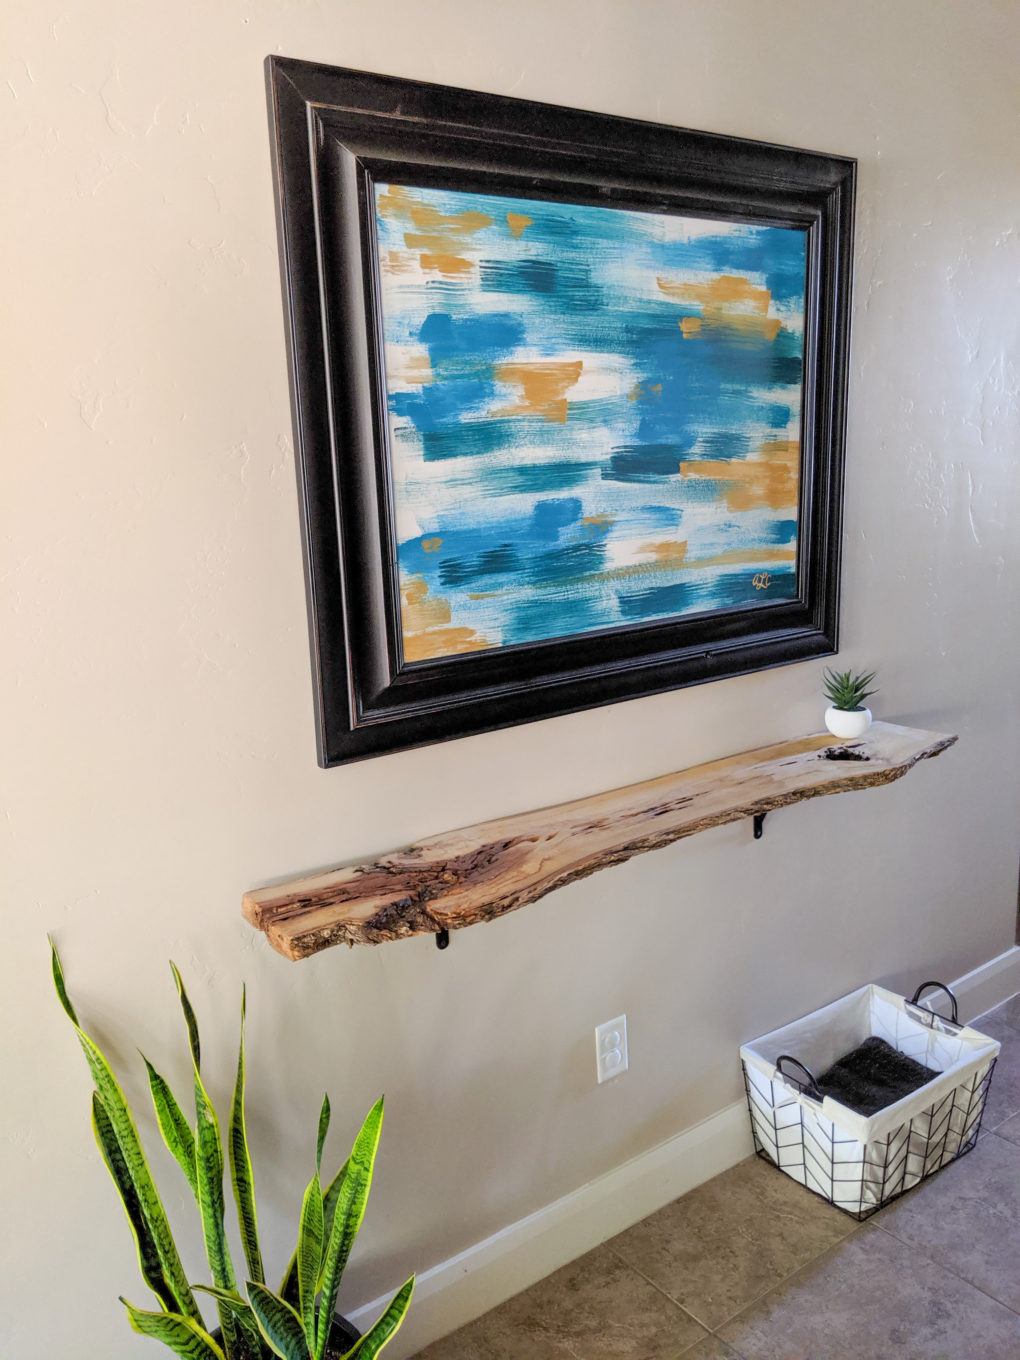 Finished product. How to make a DIY live edge wood shelf from a wood slab. The sanding, protective coat, and brackets  used to secure it. Great hallway shelf or console table.